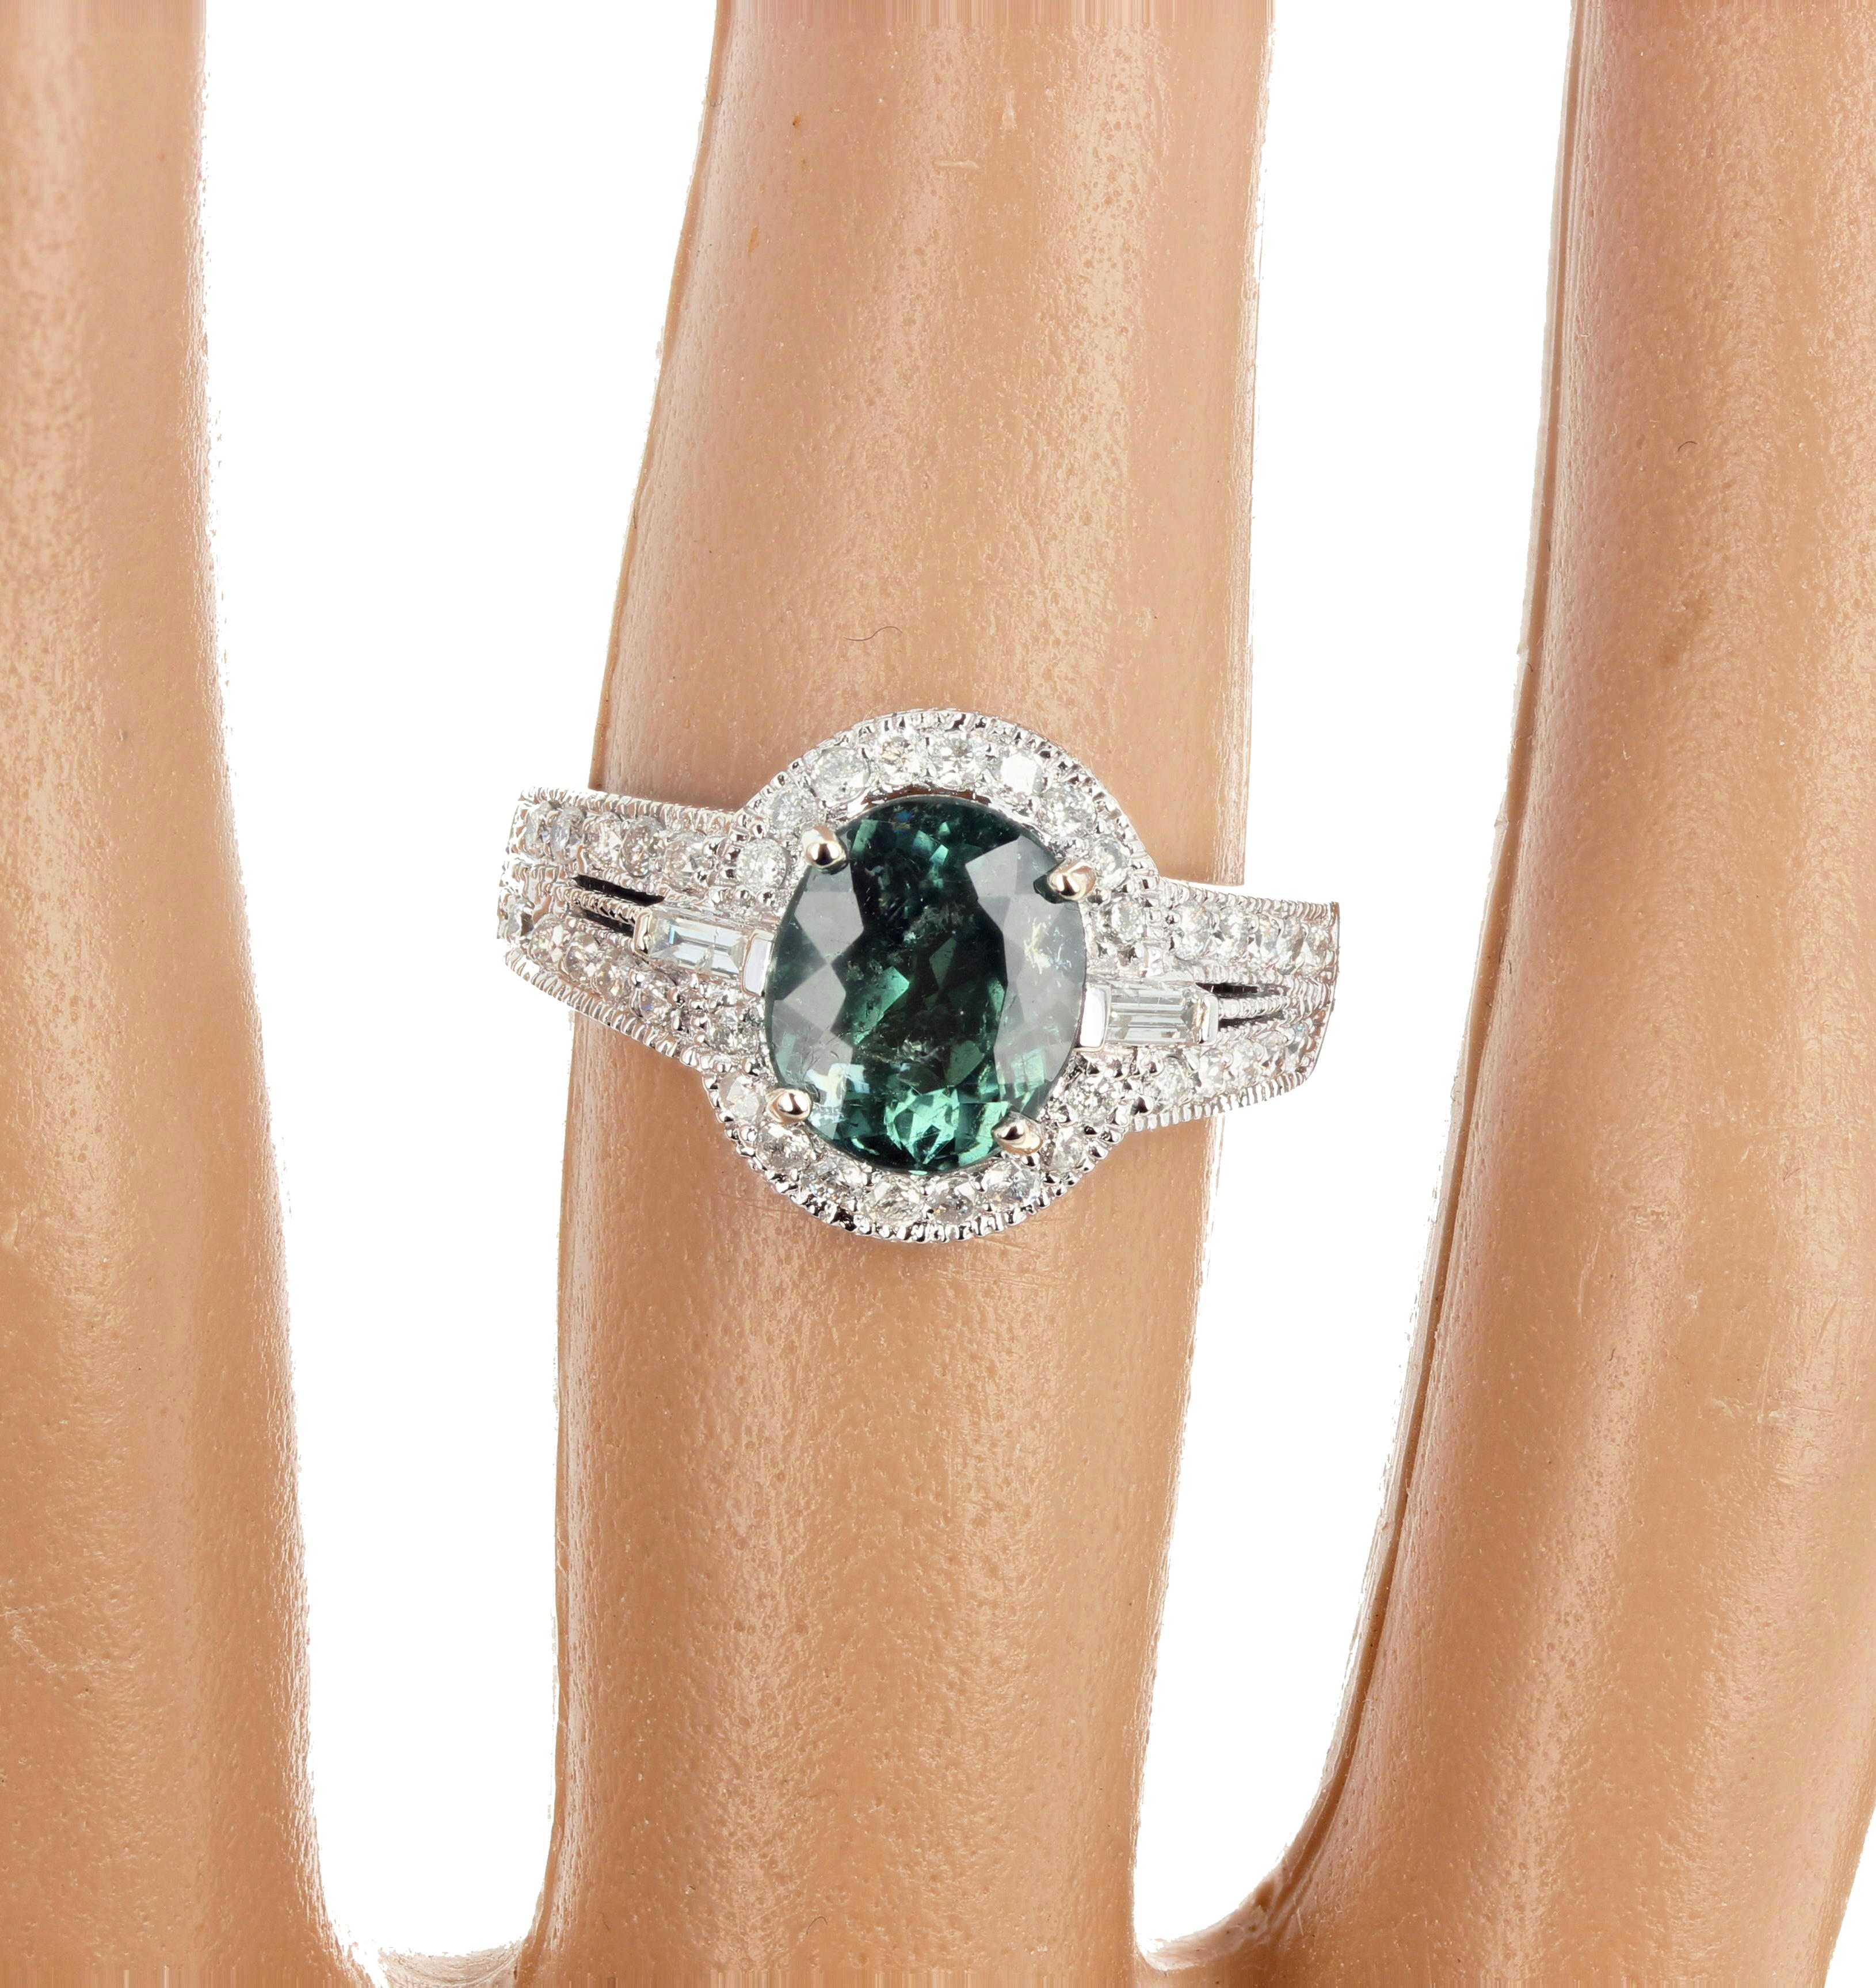 AJD Elegant 2 Ct Intense Natural Green Tourmaline & Diamond White Gold Ring In New Condition For Sale In Raleigh, NC